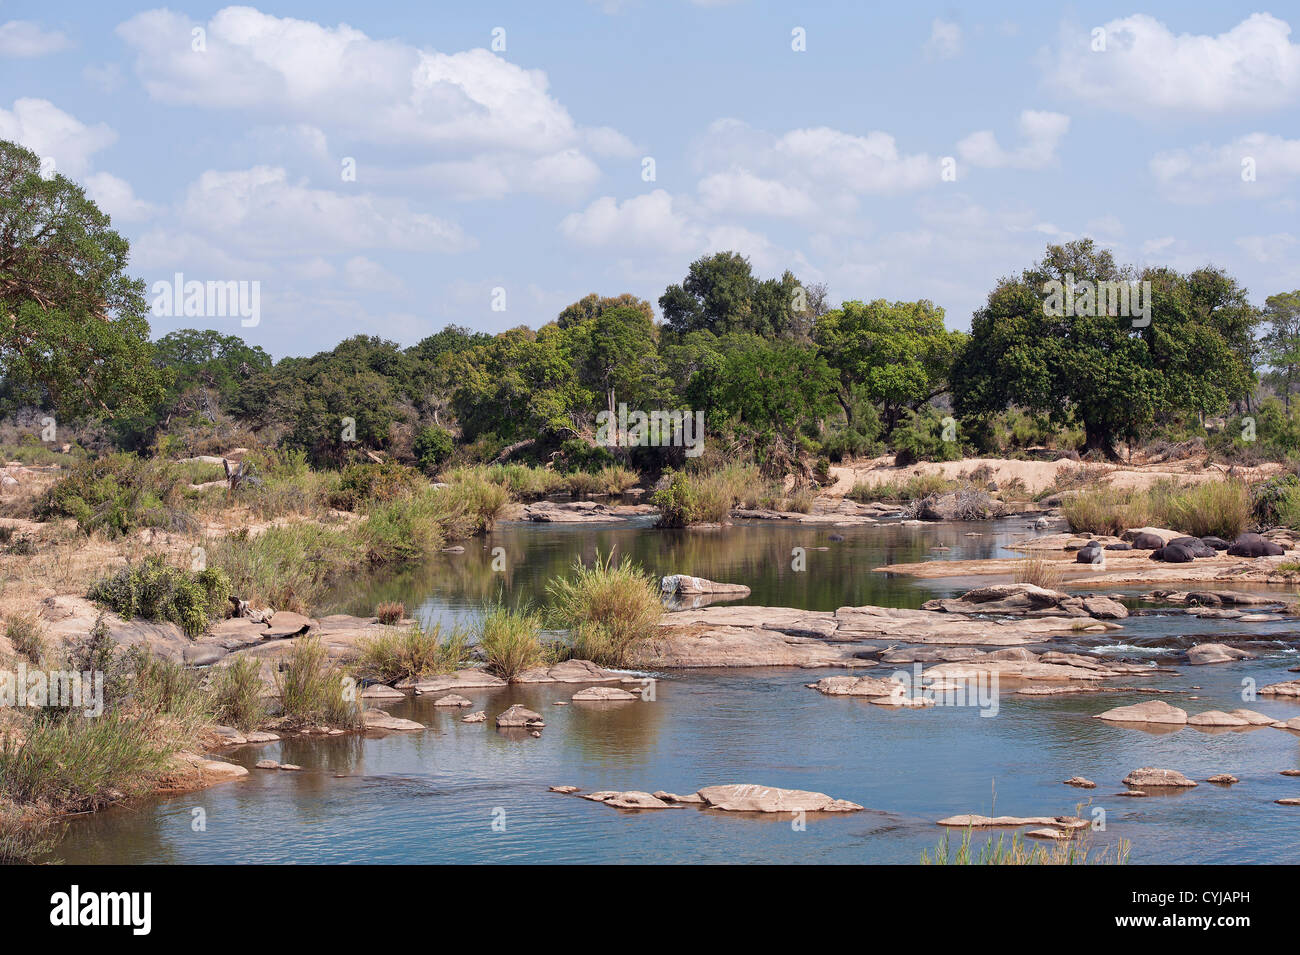 Hippo basking on the Sabie river bank, Kruger National Park, South Africa Stock Photo